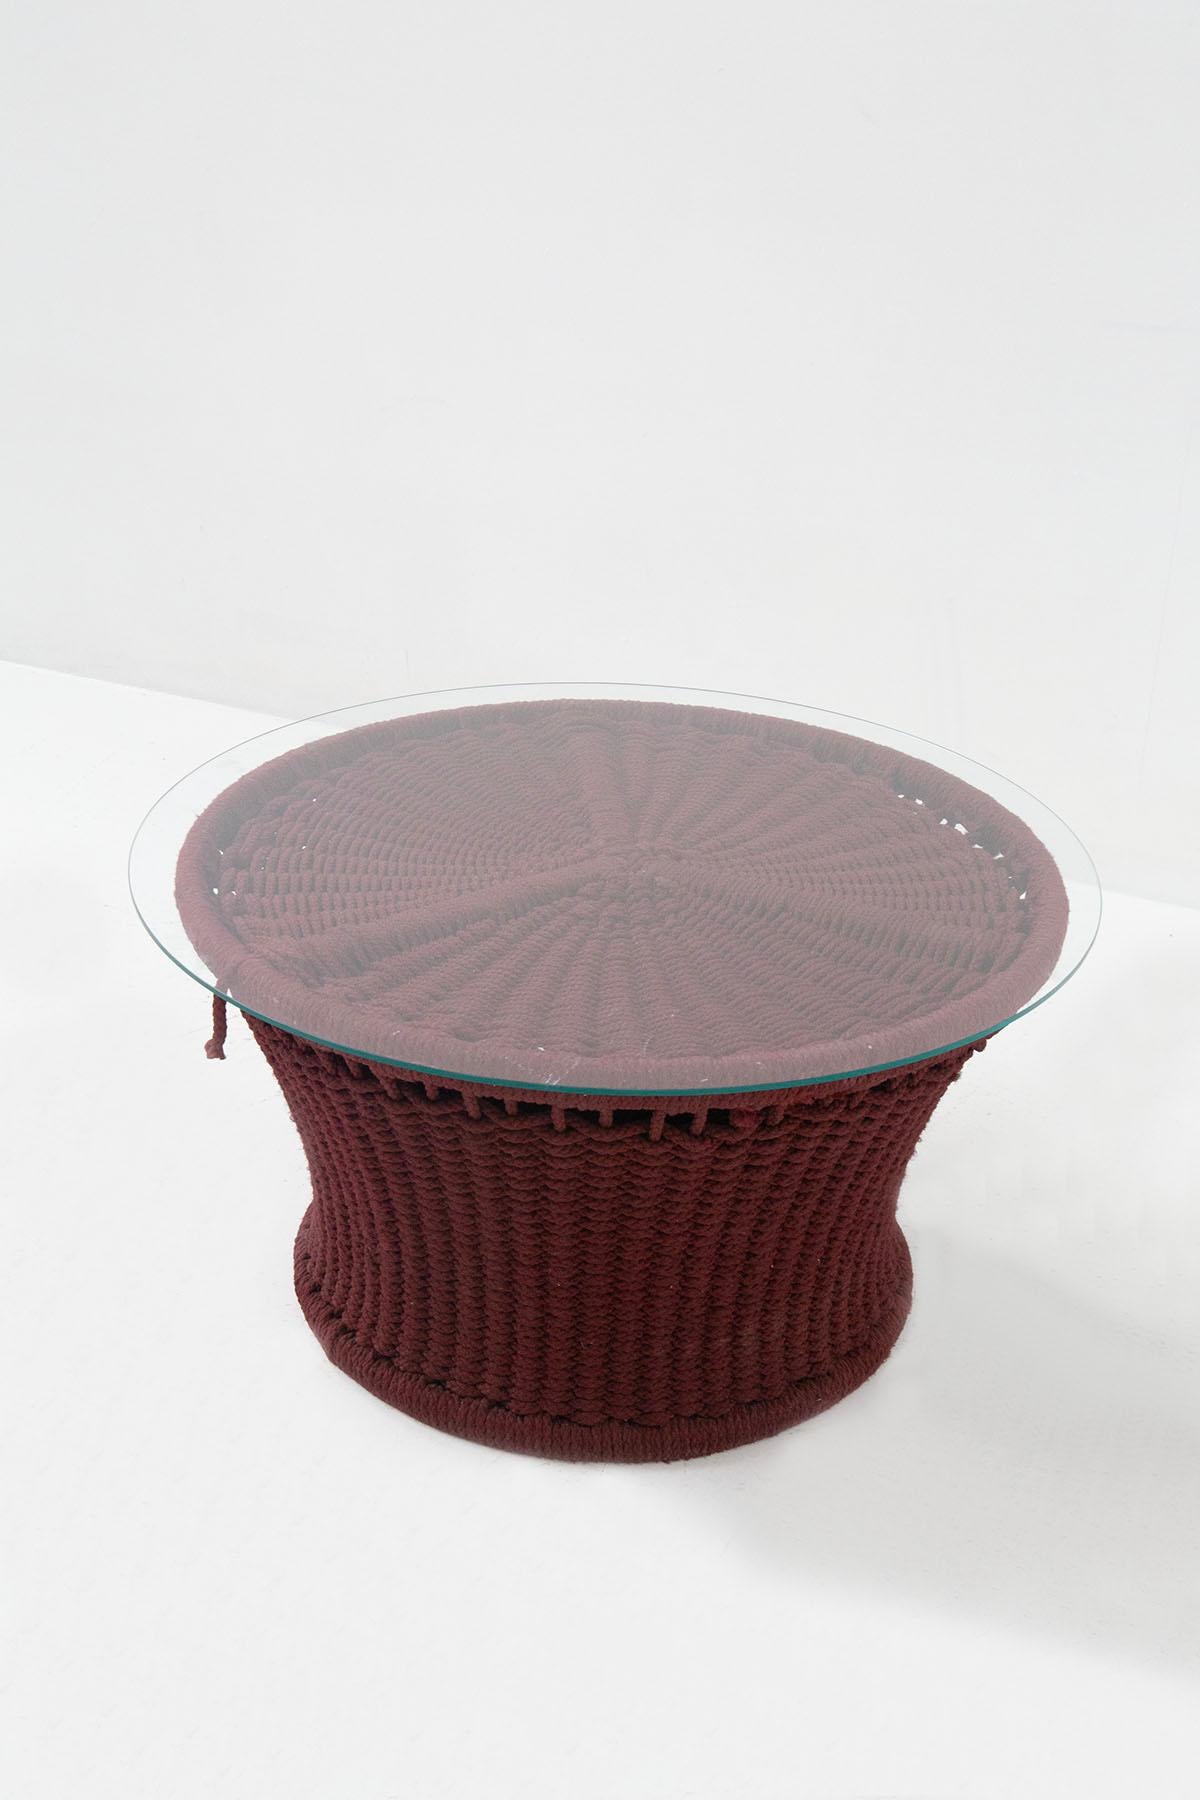 Rare and beautiful coffee table by Marzio Cecchi from the Italian 1970s. The coffee table was made for a hotel on Lake Garda. The product is in excellent condition. Made with an iron frame and wrapped in a thick net of red amaranth-colored rope, the